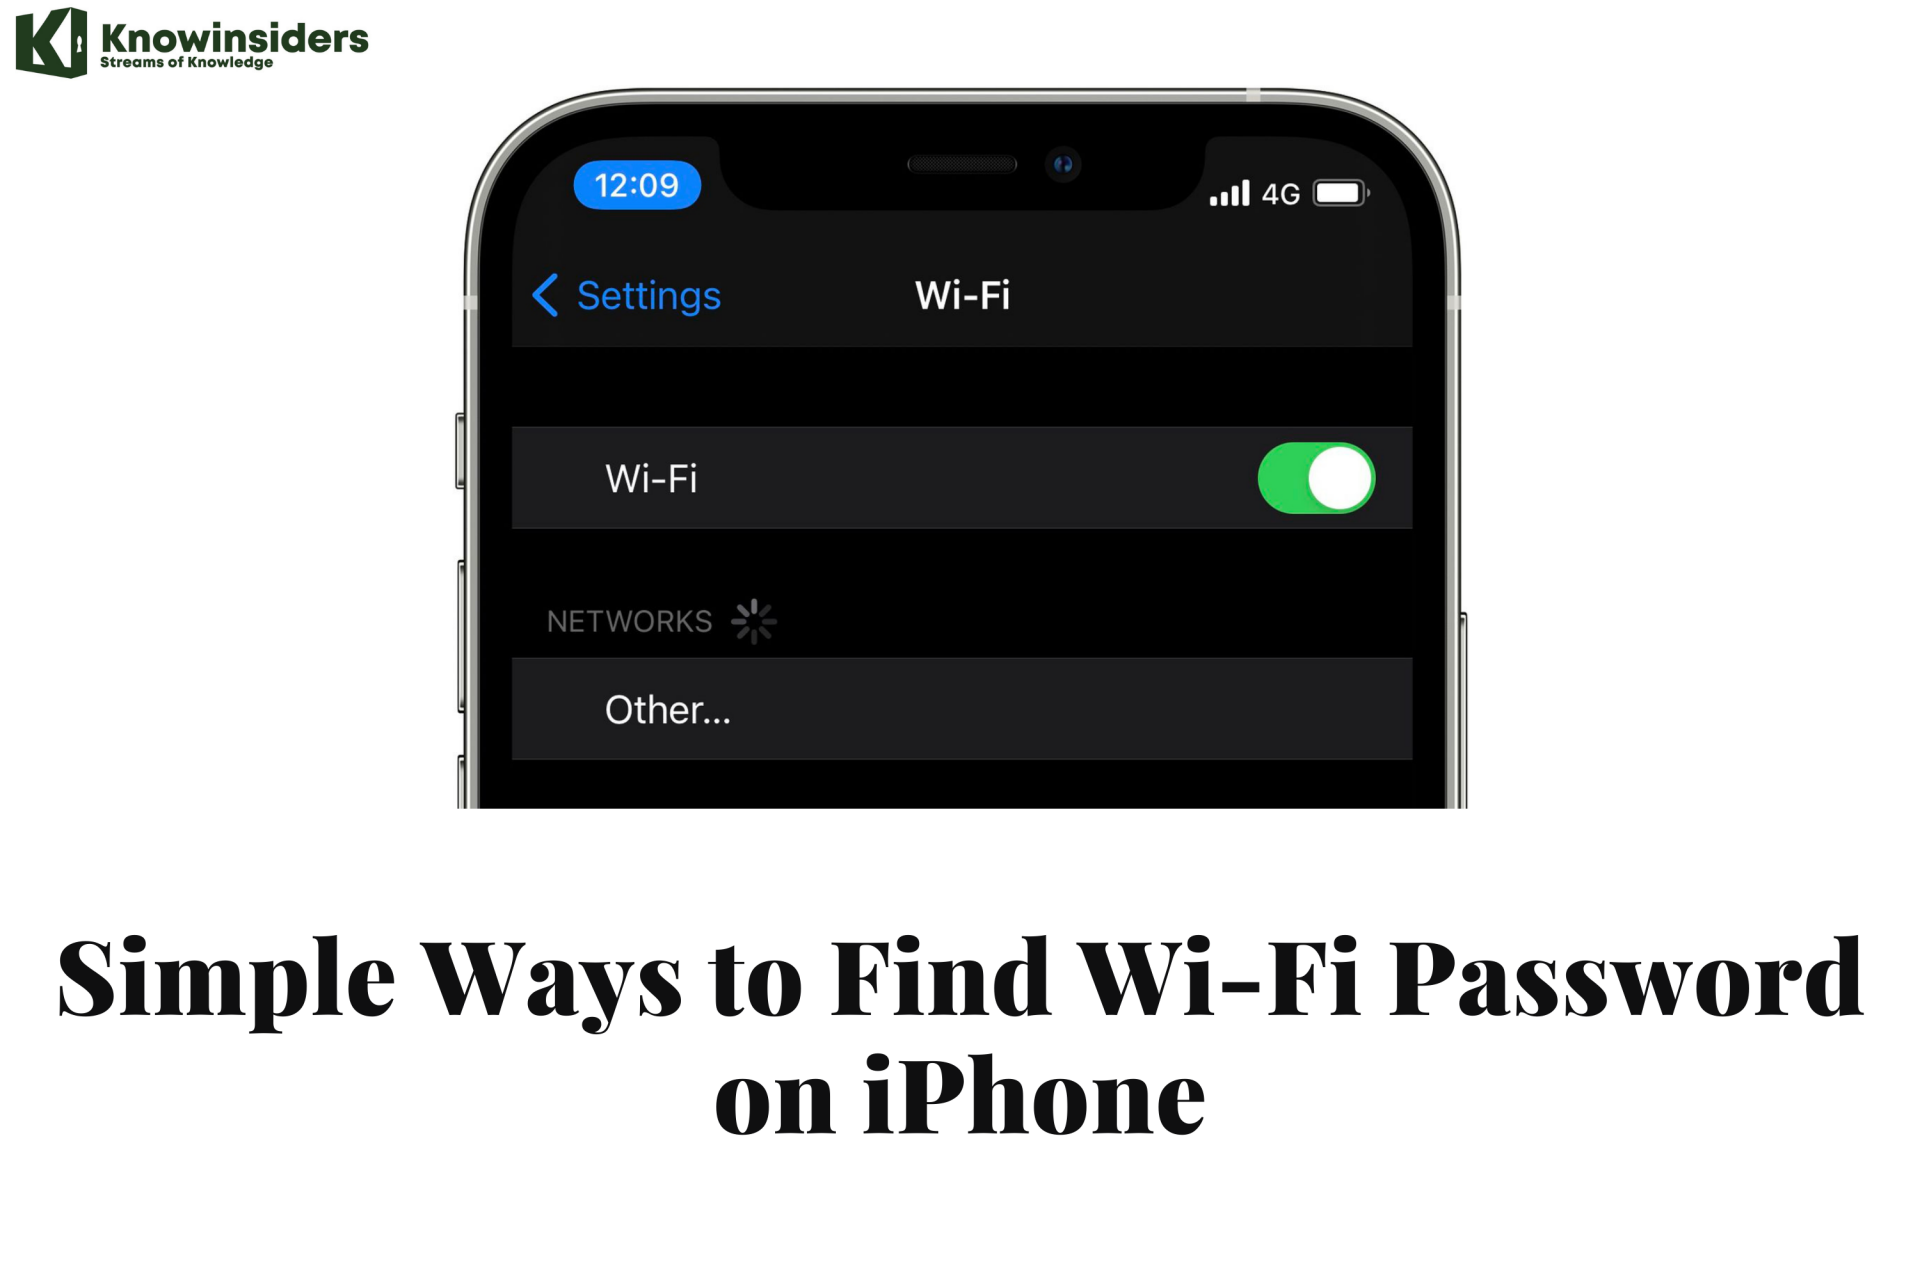 simple-ways-to-find-wi-fi-password-on-iphone-a-complete-guide-step